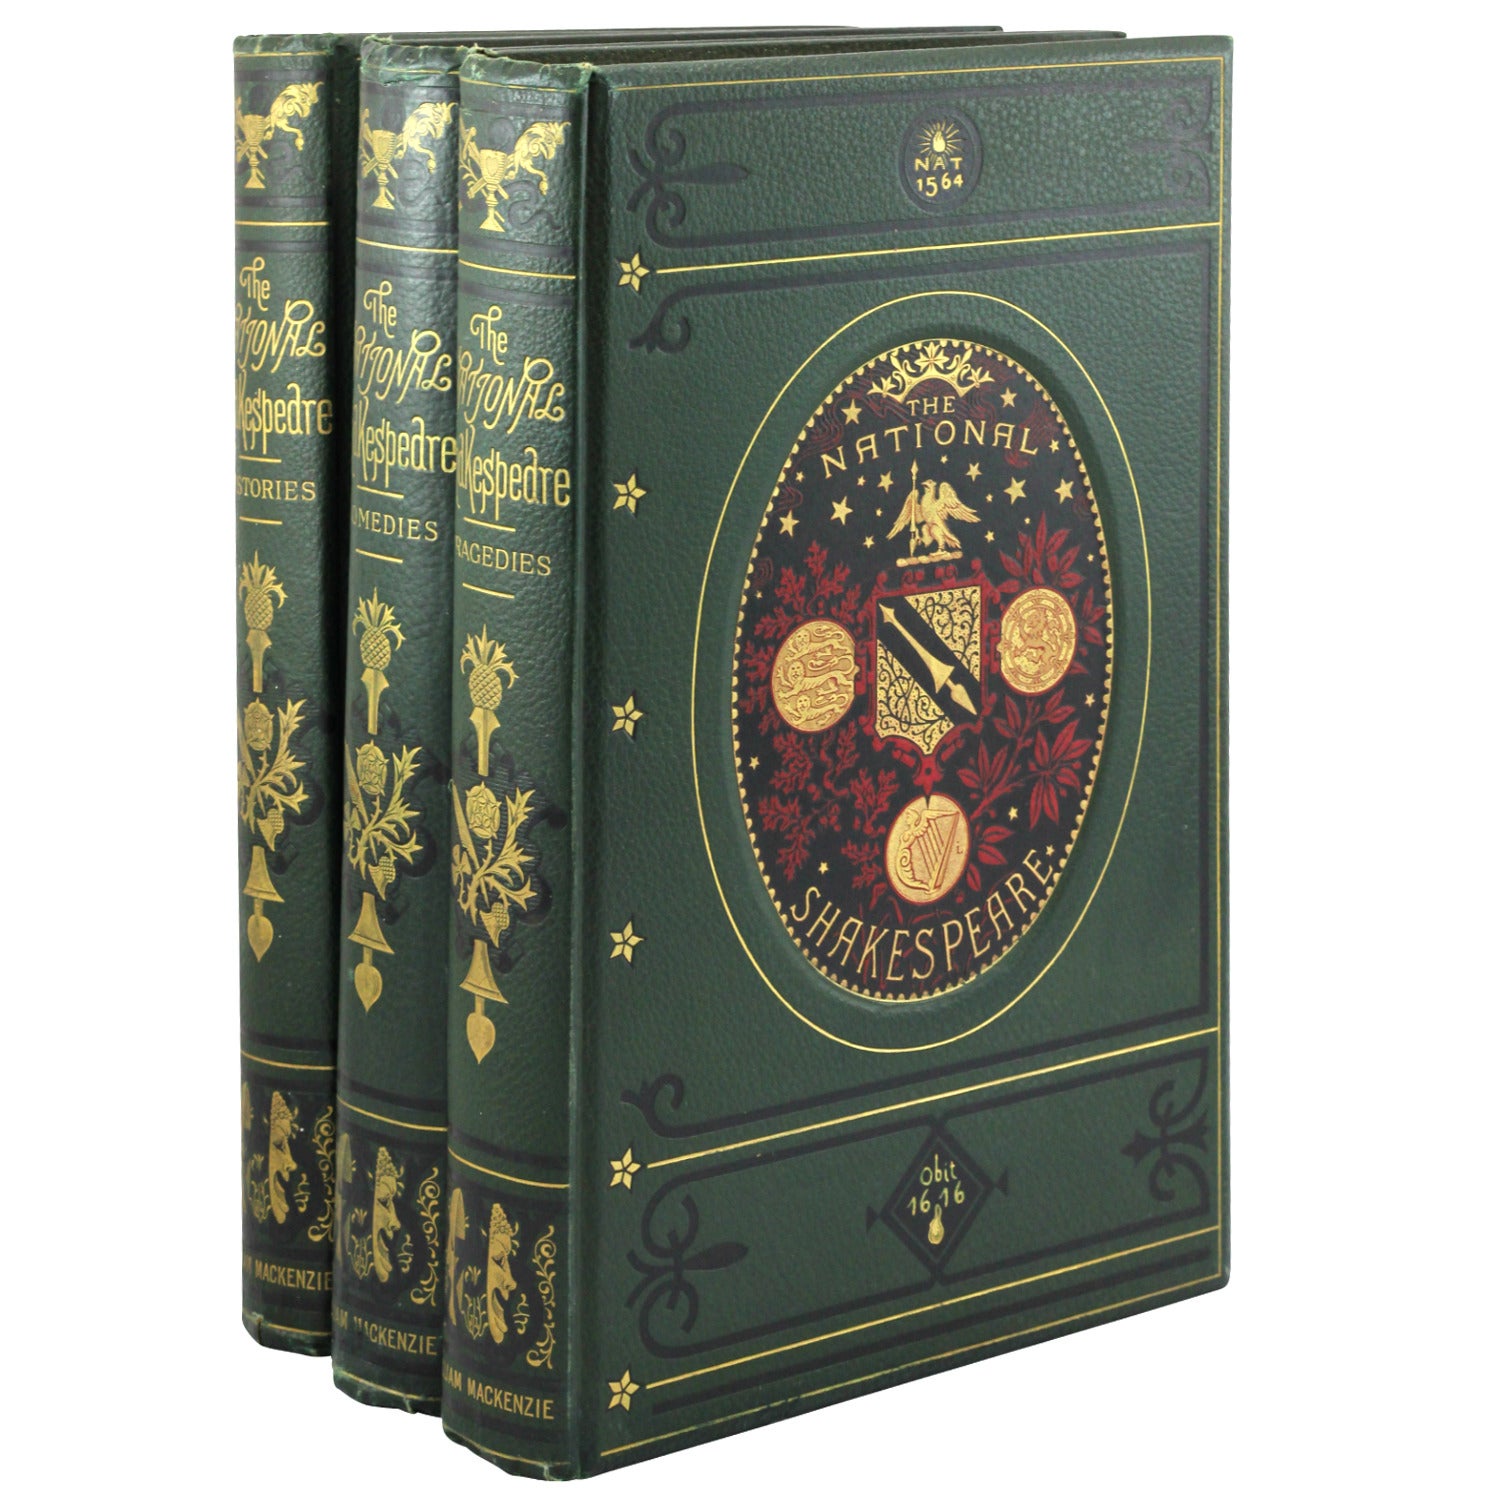 Late 19th Century the National Collection of Shakespeare